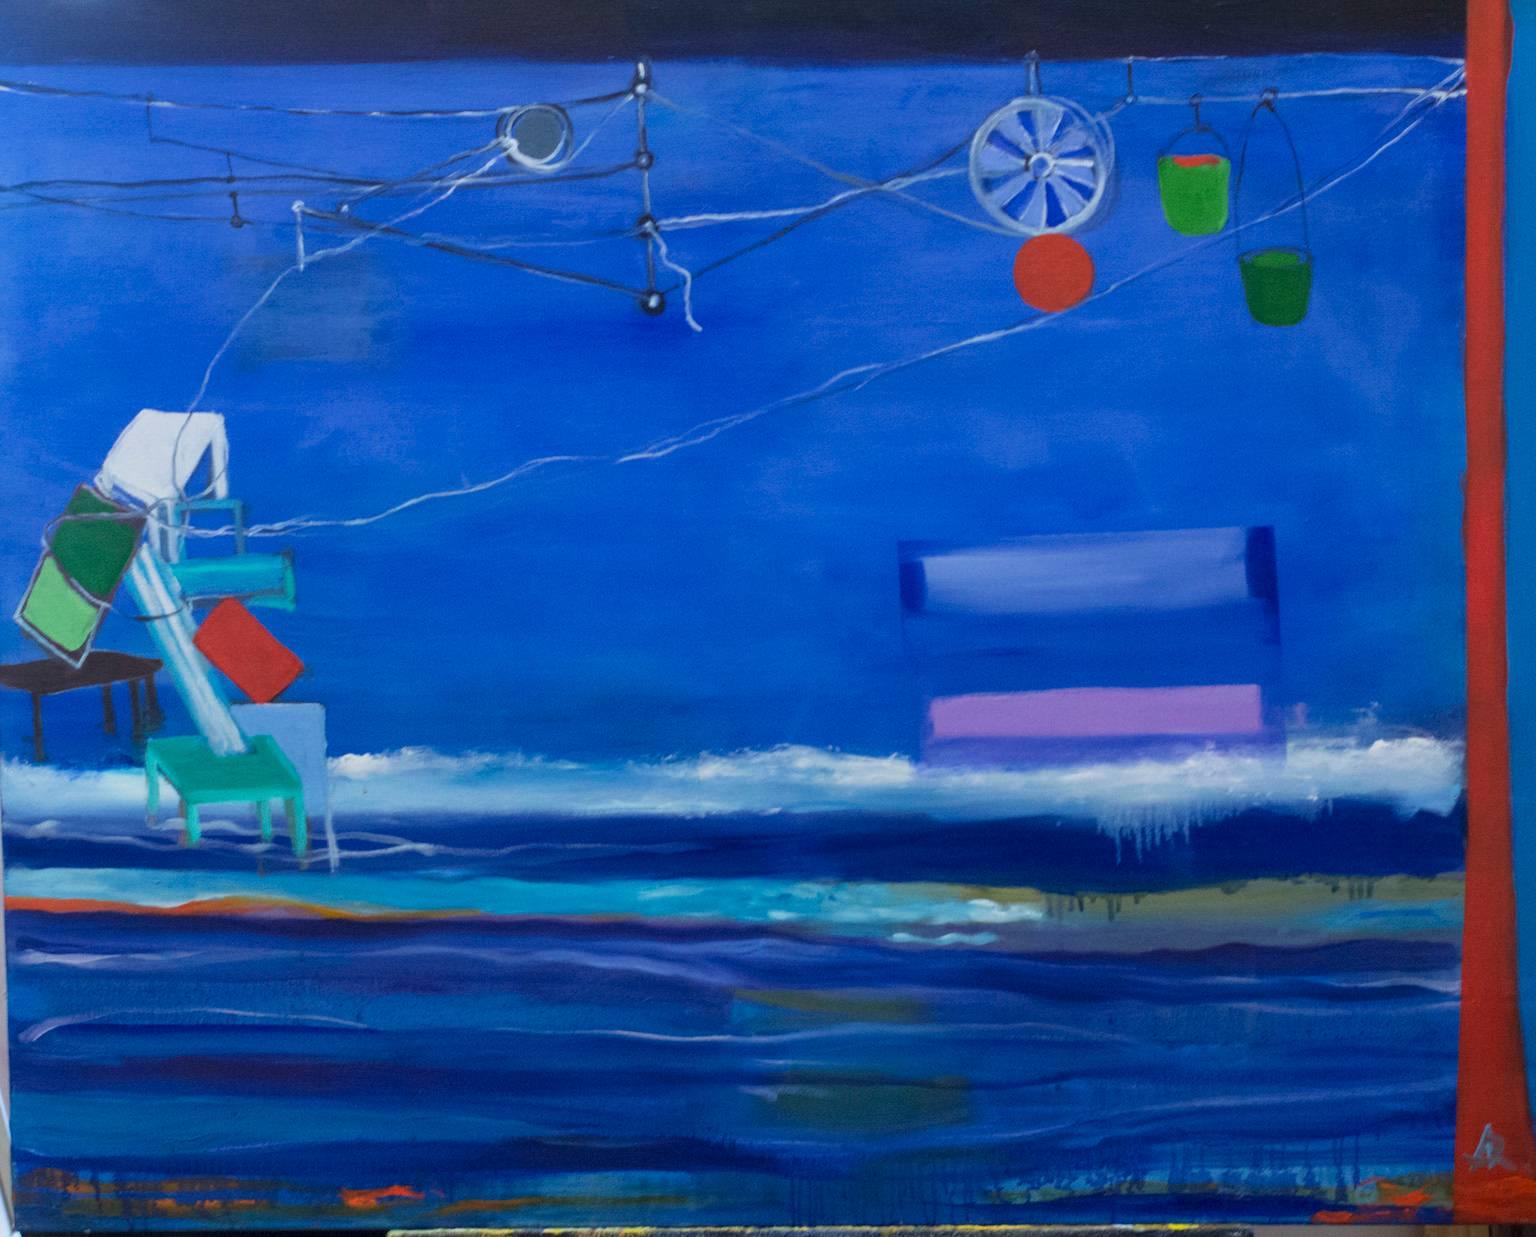 Alexandra Rozenman Interior Painting - "Helping Mark Rothko to Move his Furniture", seascape, blues, pink, oil painting